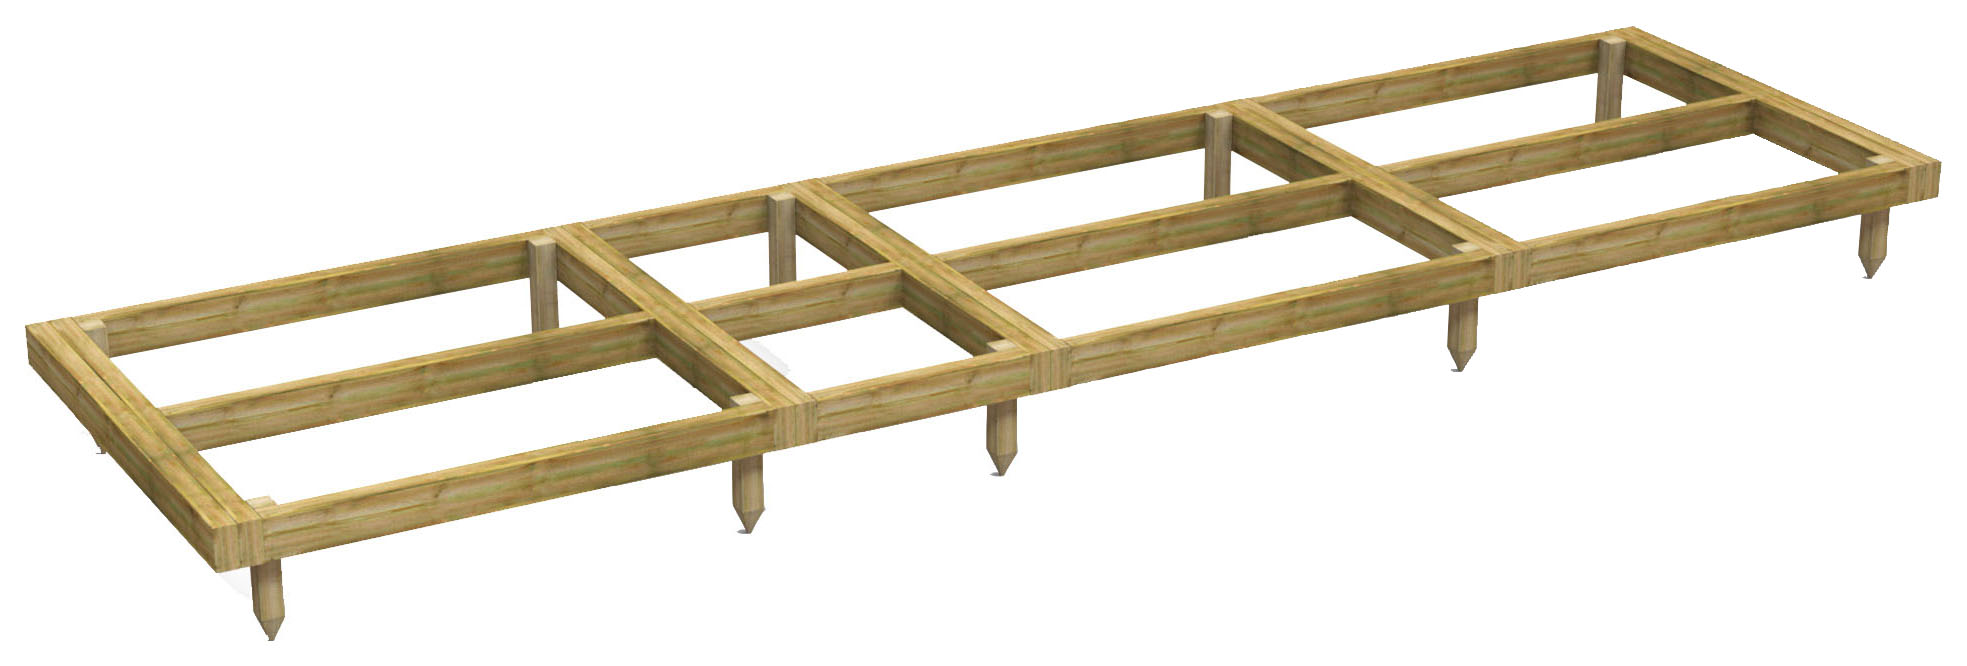 Power Sheds Pressure Treated Garden Building Base Kit - 14 x 4ft